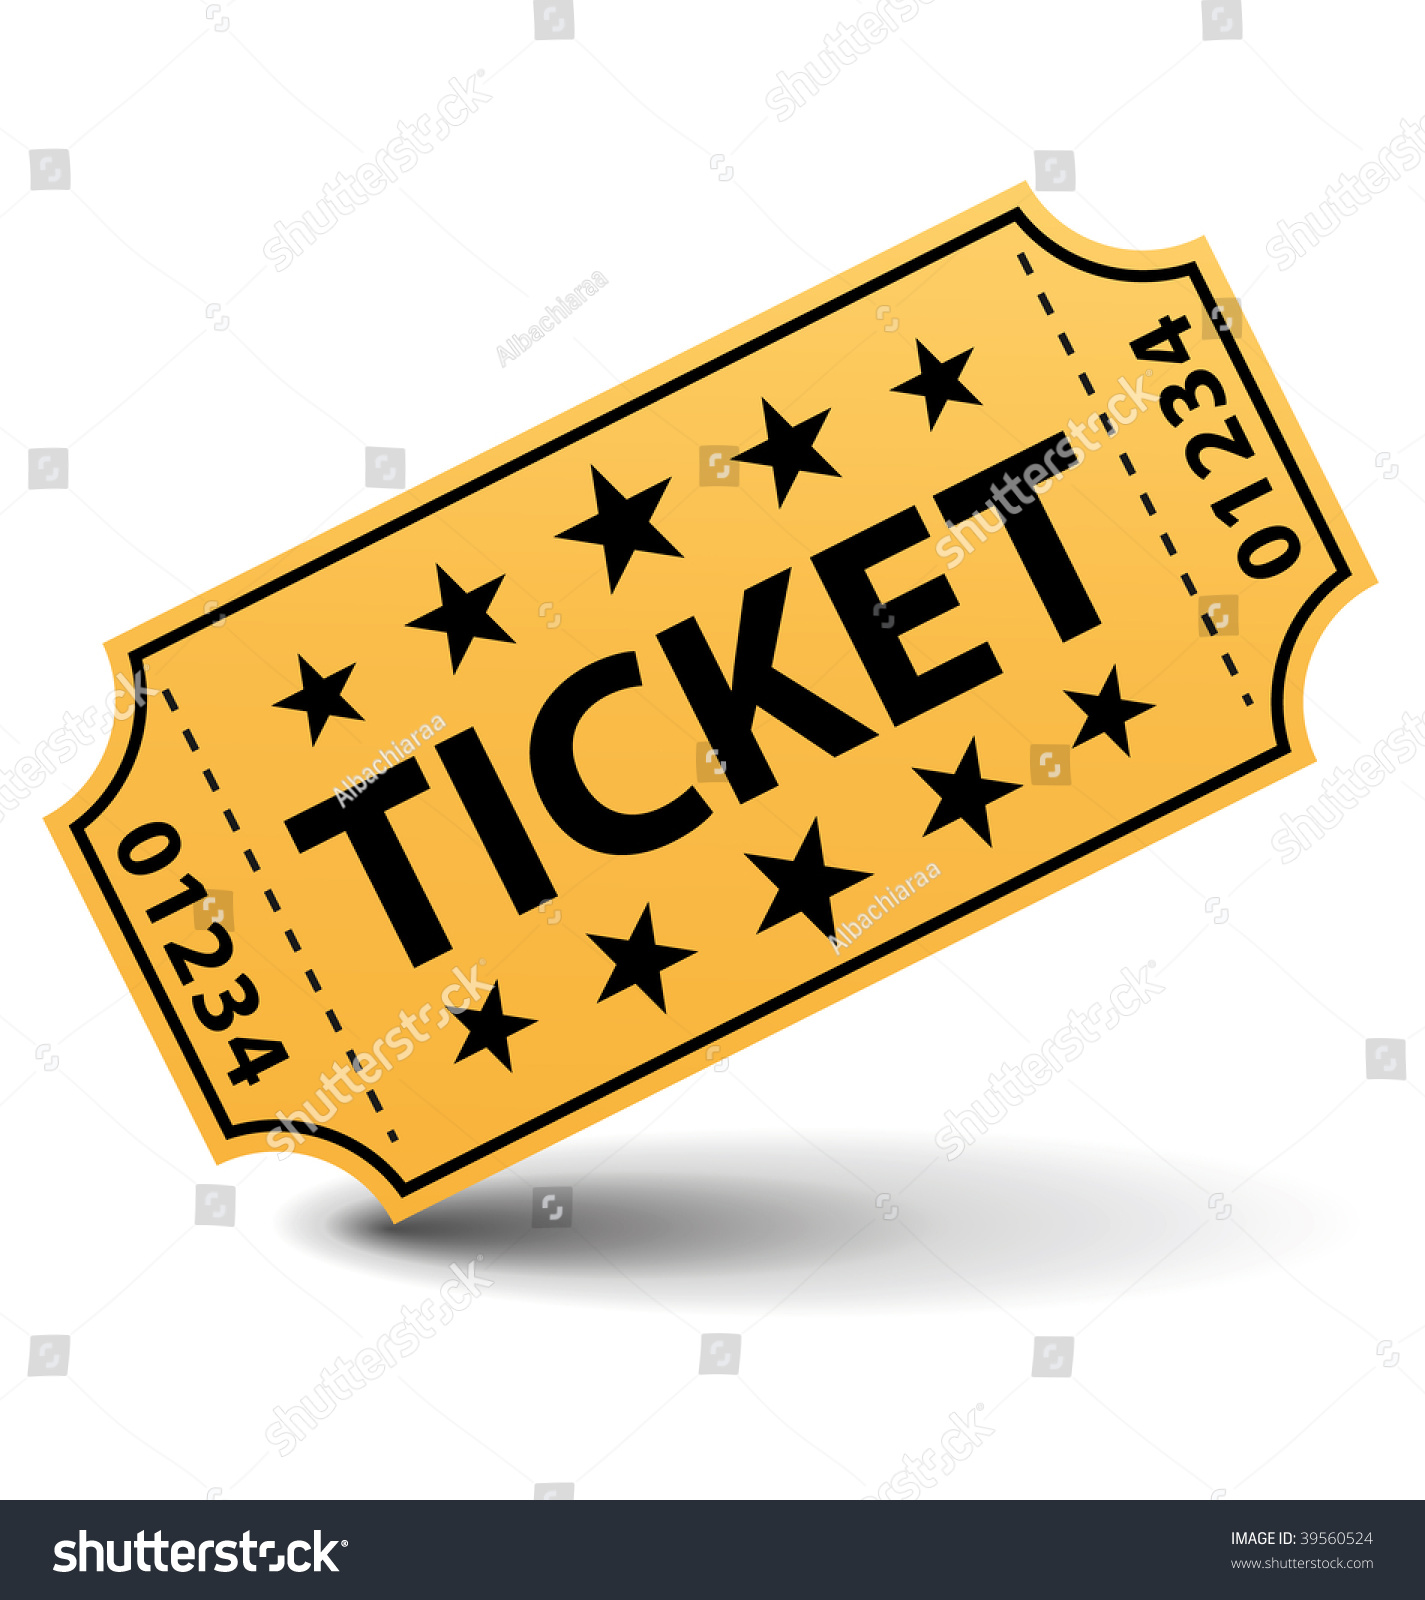 yellow ticket clipart - photo #18